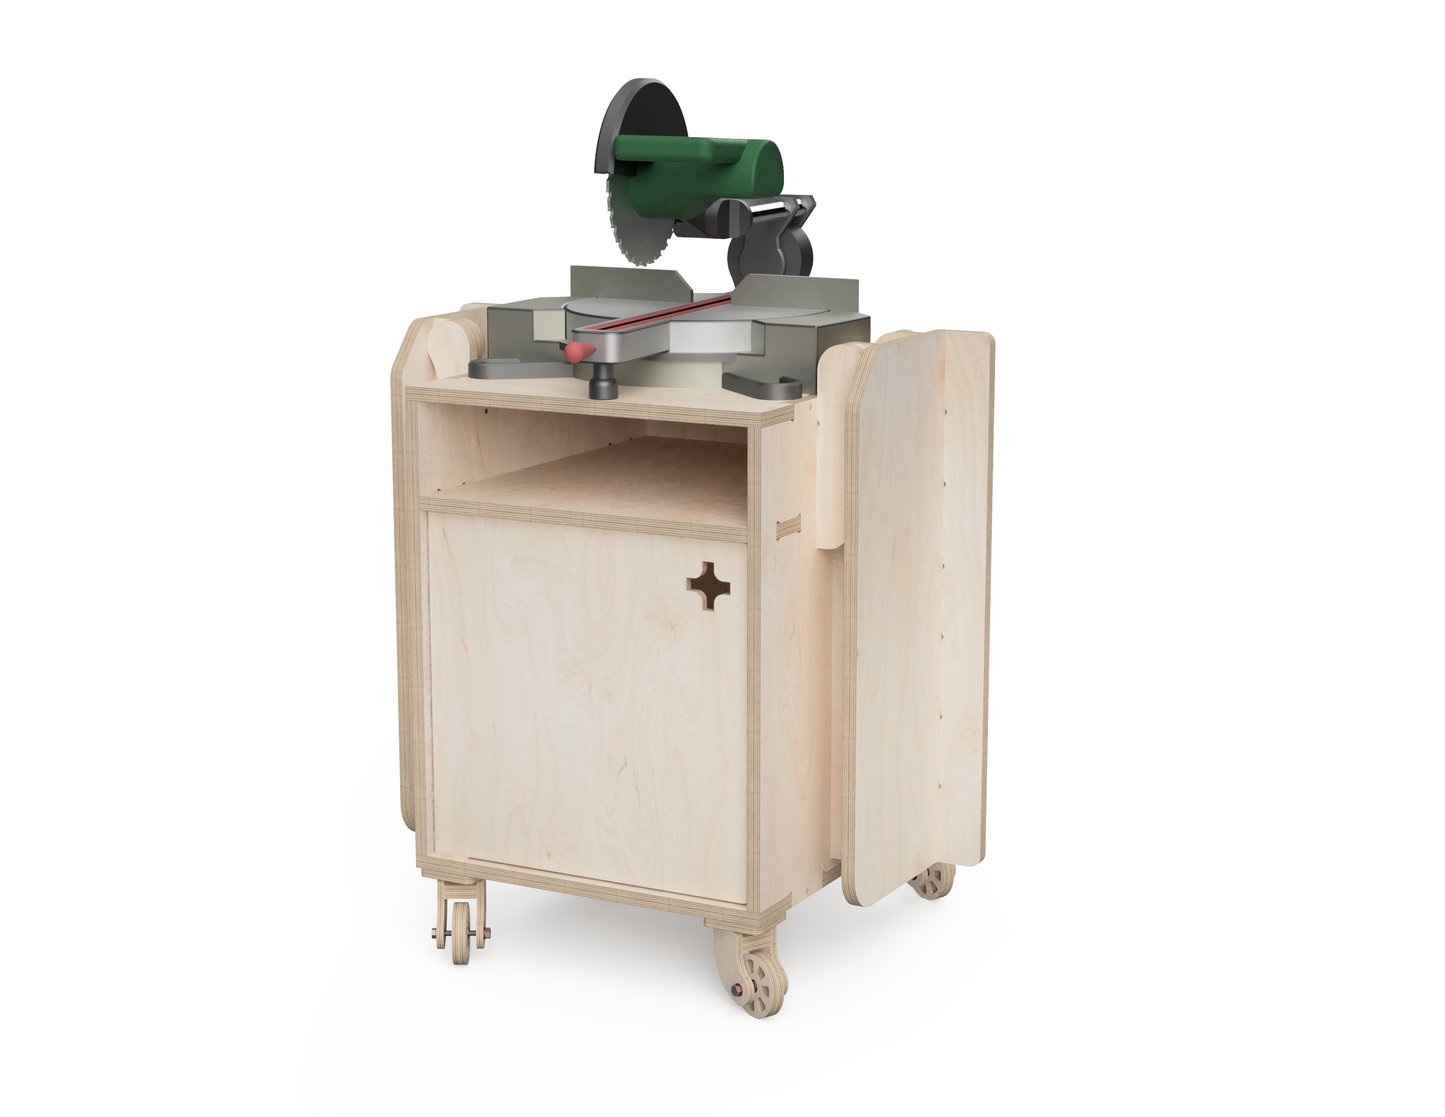 Mobile Miter Saw Station DXF Files